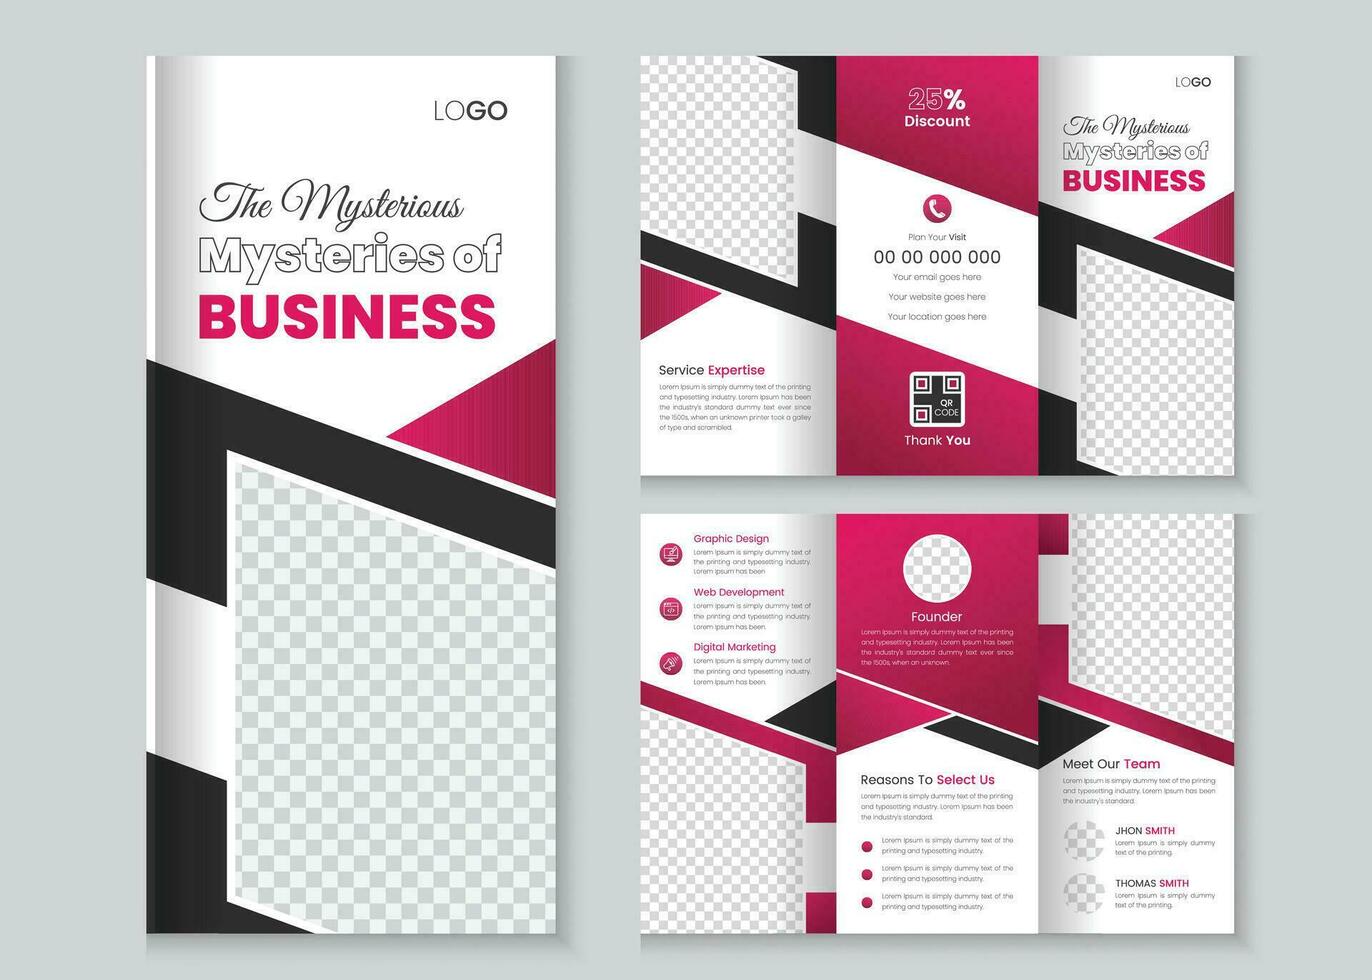 Modern Trifold Business Brochure Template, Business Brochure Template in Tri Fold Layout. Corporate Design Leaflet with replicable image, Trifold brochure design with square shapes, Geometric Shapes vector